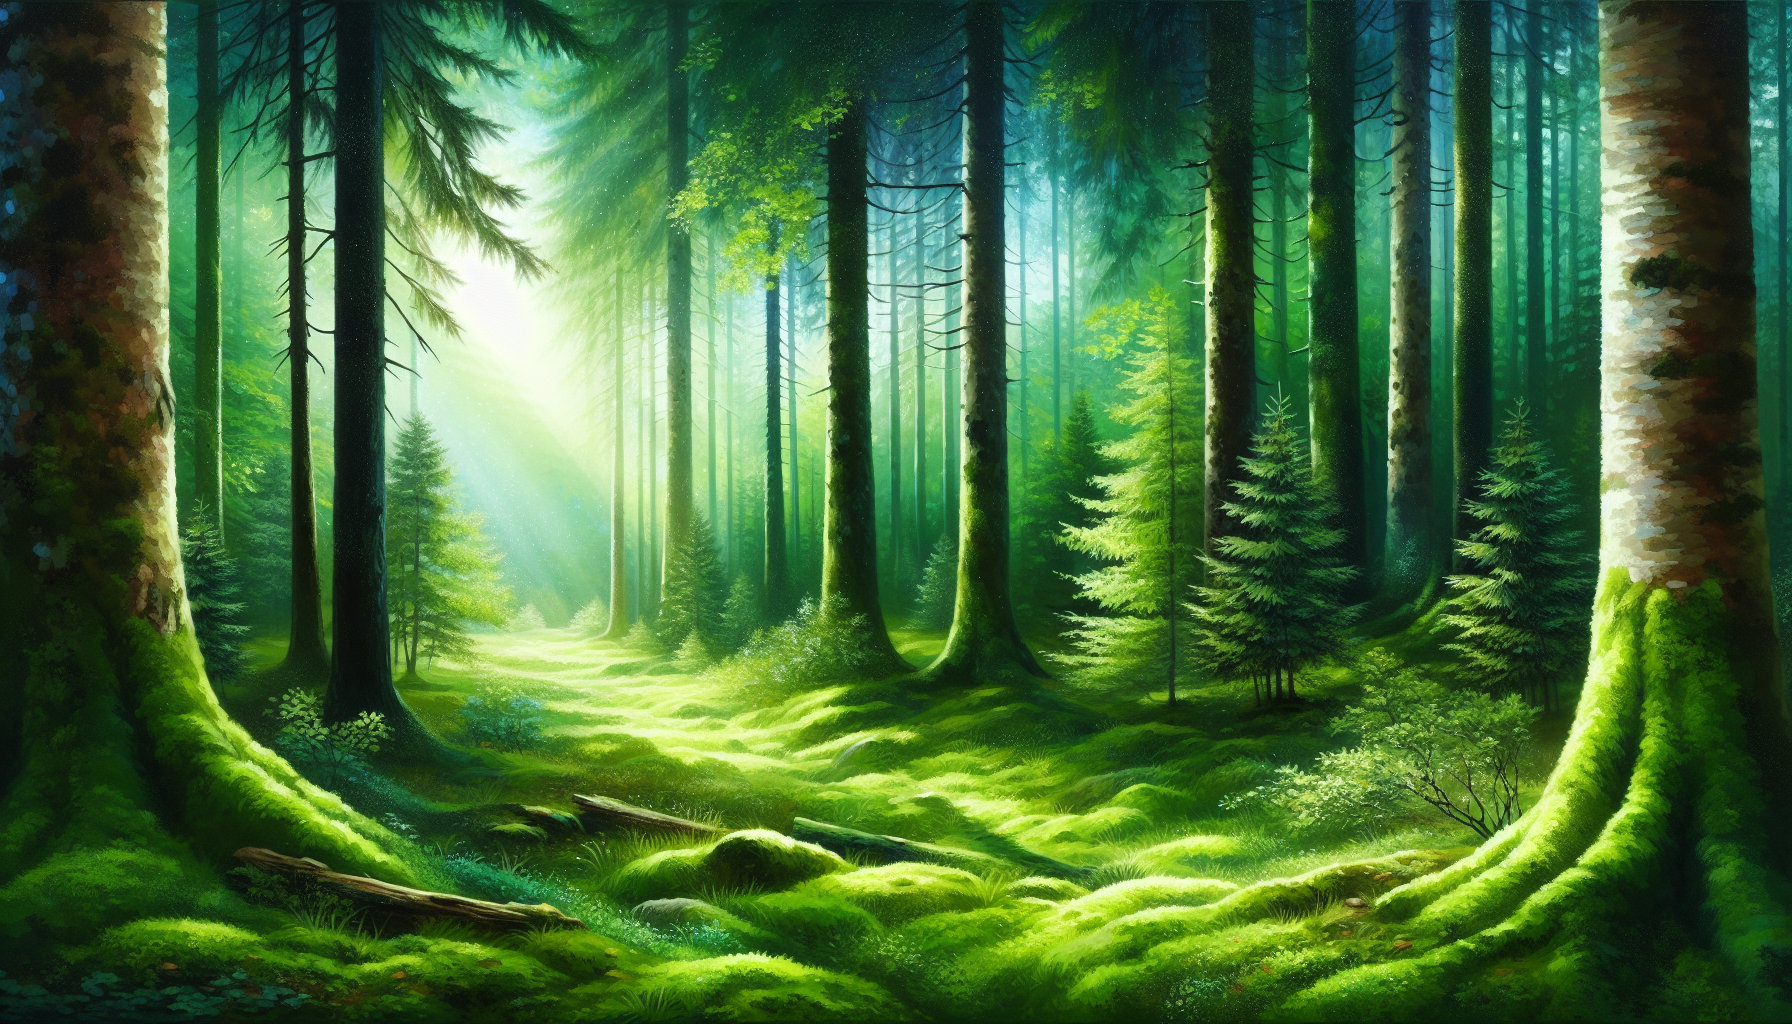 Illustration of a serene forest with green trees and a sense of tranquility